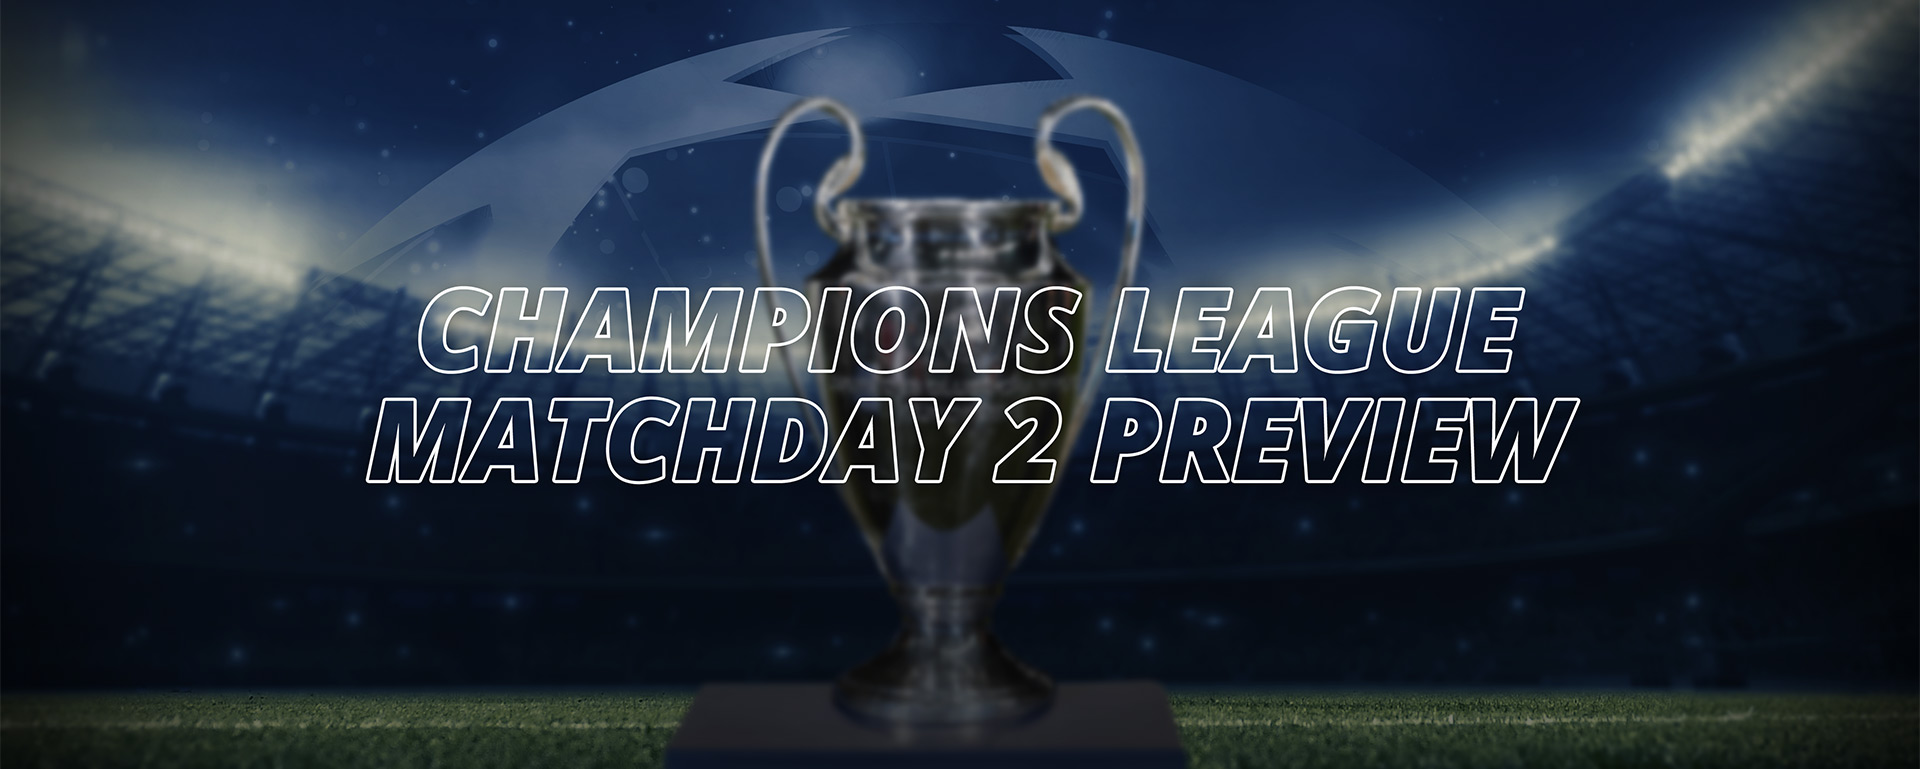 CHAMPIONS LEAGUE MATCHDAY 2 PREVIEW